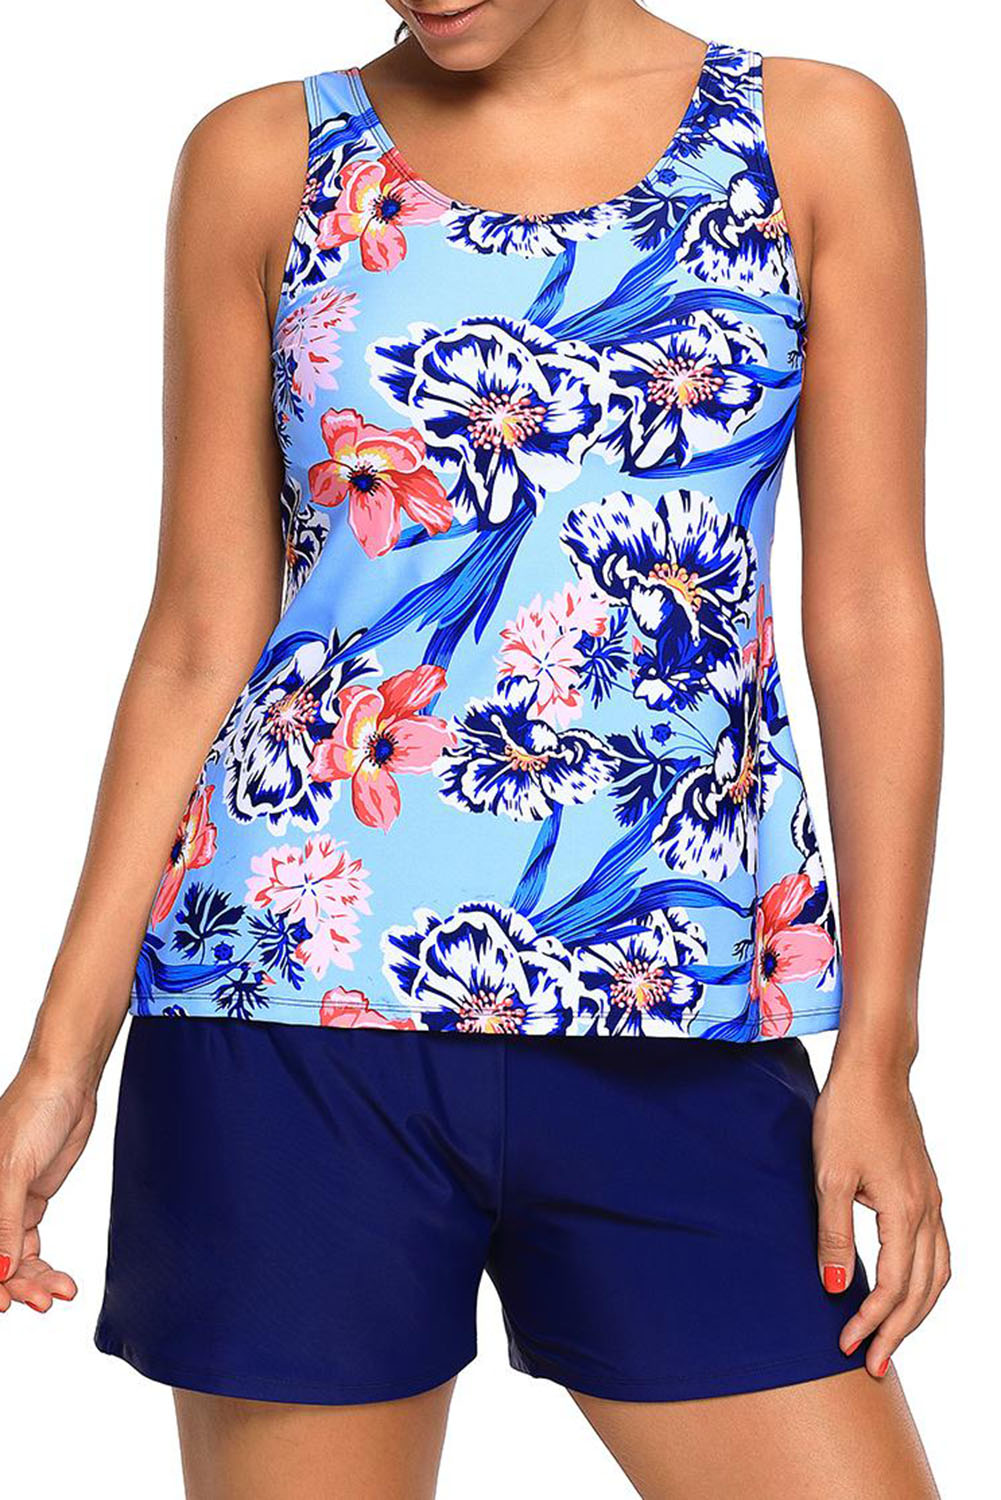 SHEWIN Blue Coral Floral Print Tankini and Short Swimsuit US$ 5.97 - SHEWIN